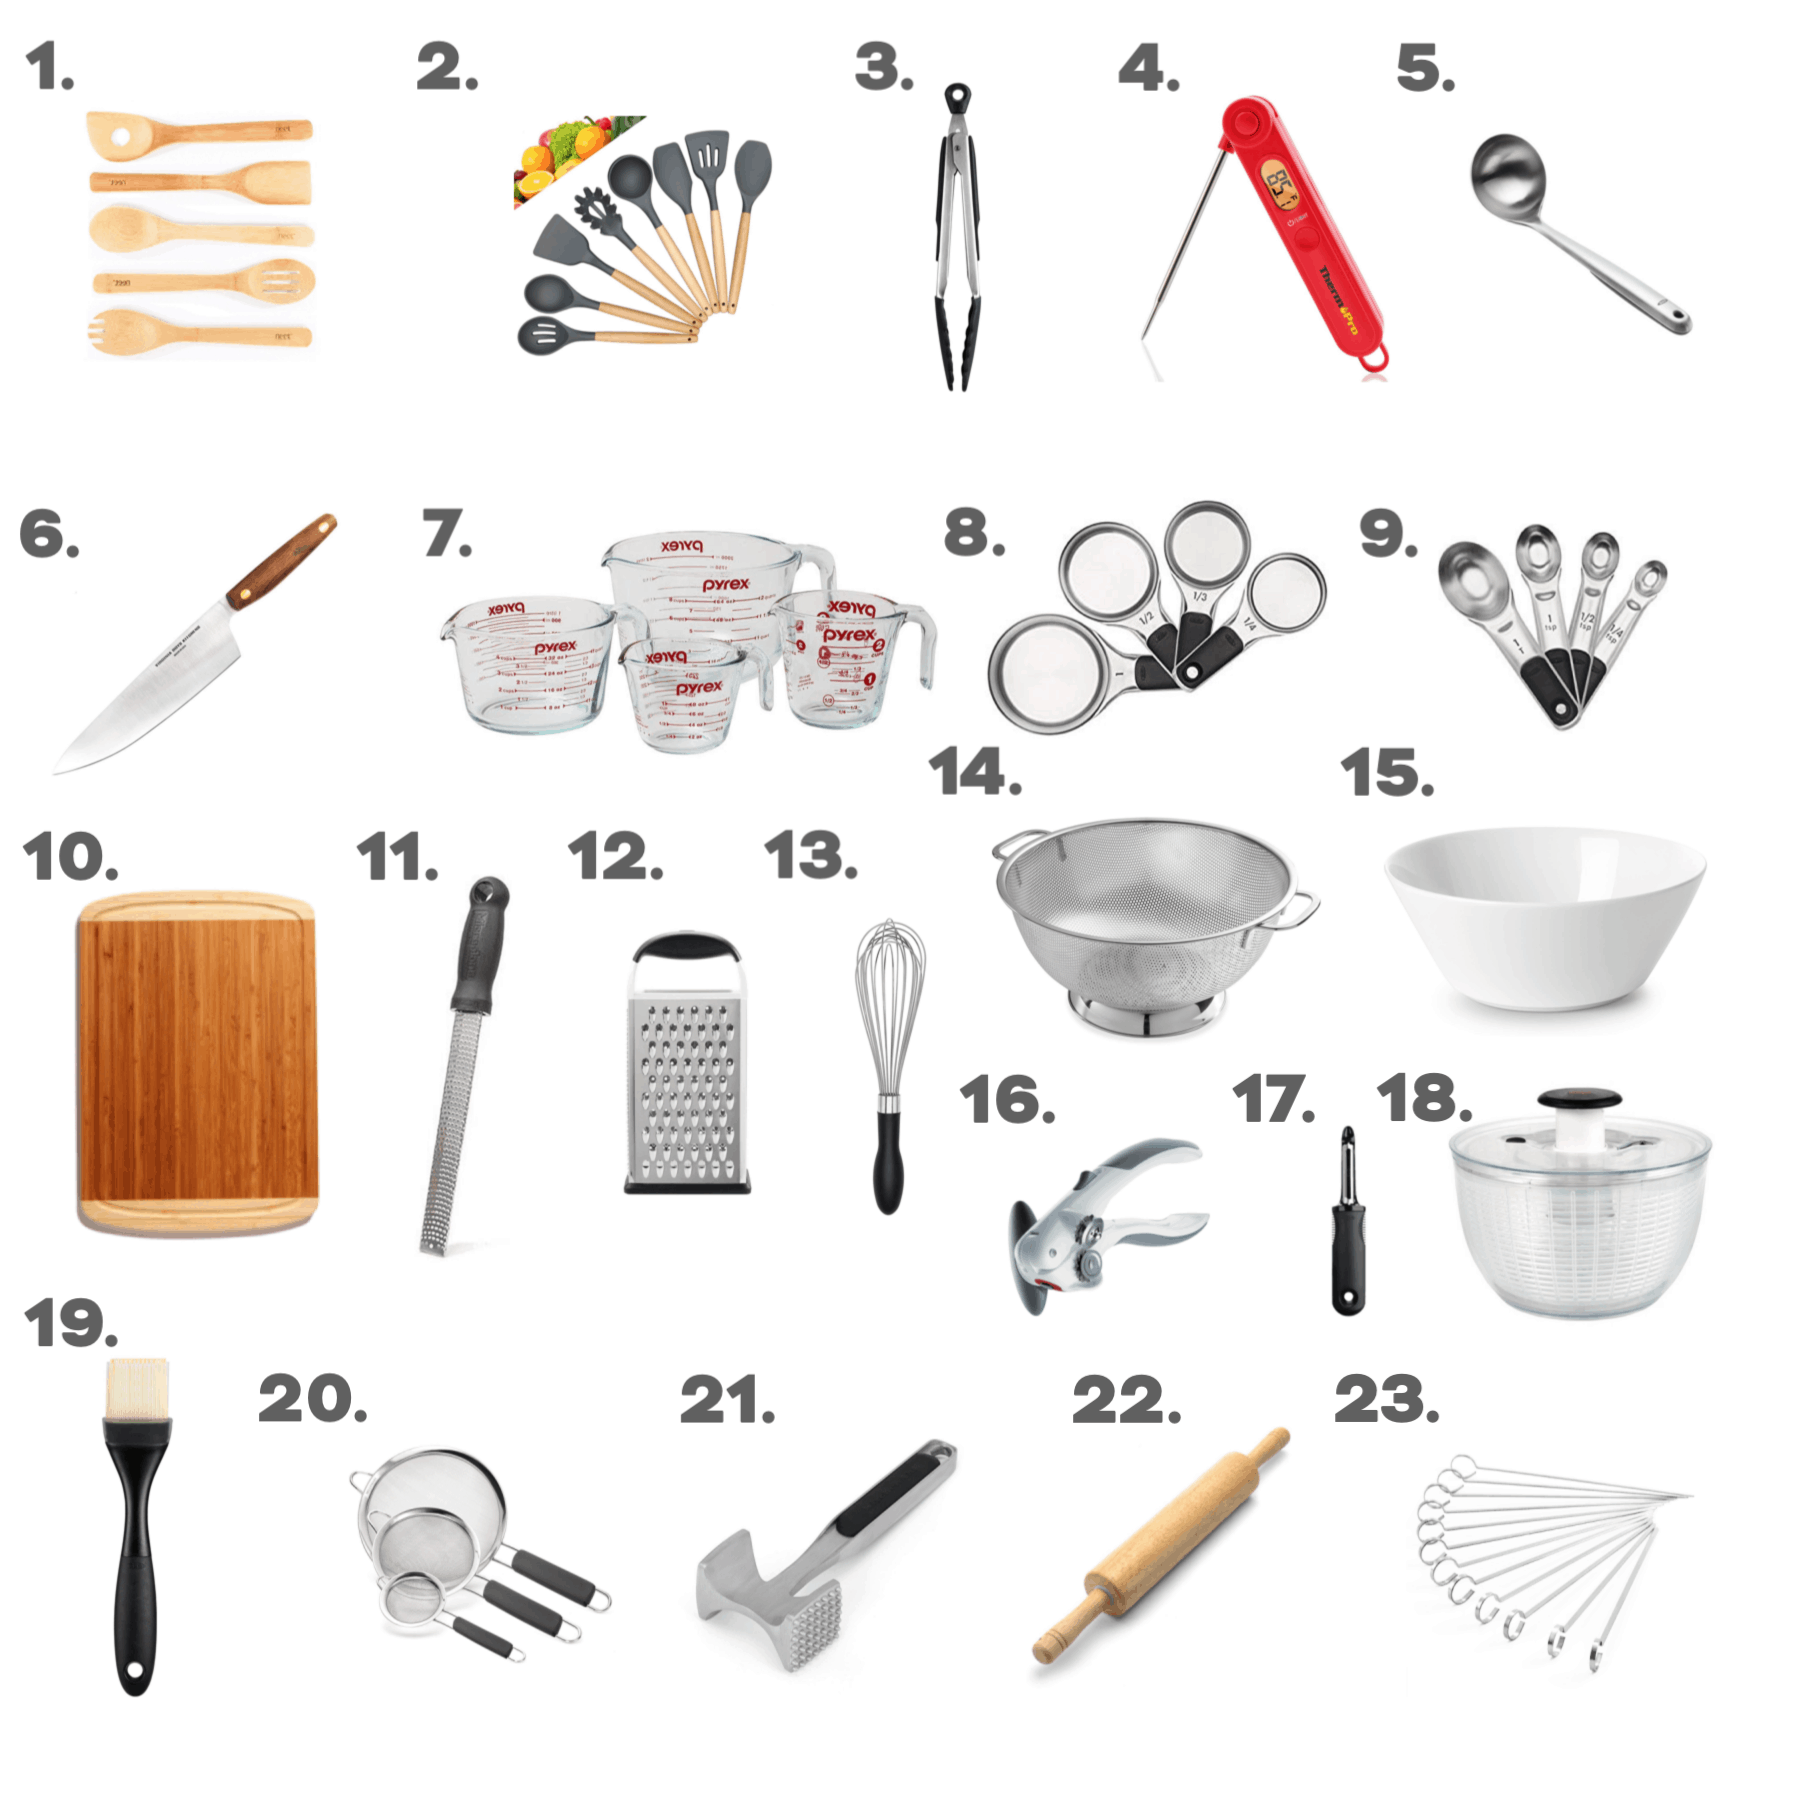 https://www.tasteslovely.com/wp-content/uploads/2018/06/Favorite-Non-Toxic-Kitchen-Utensils-and-Small-Gadgets.png